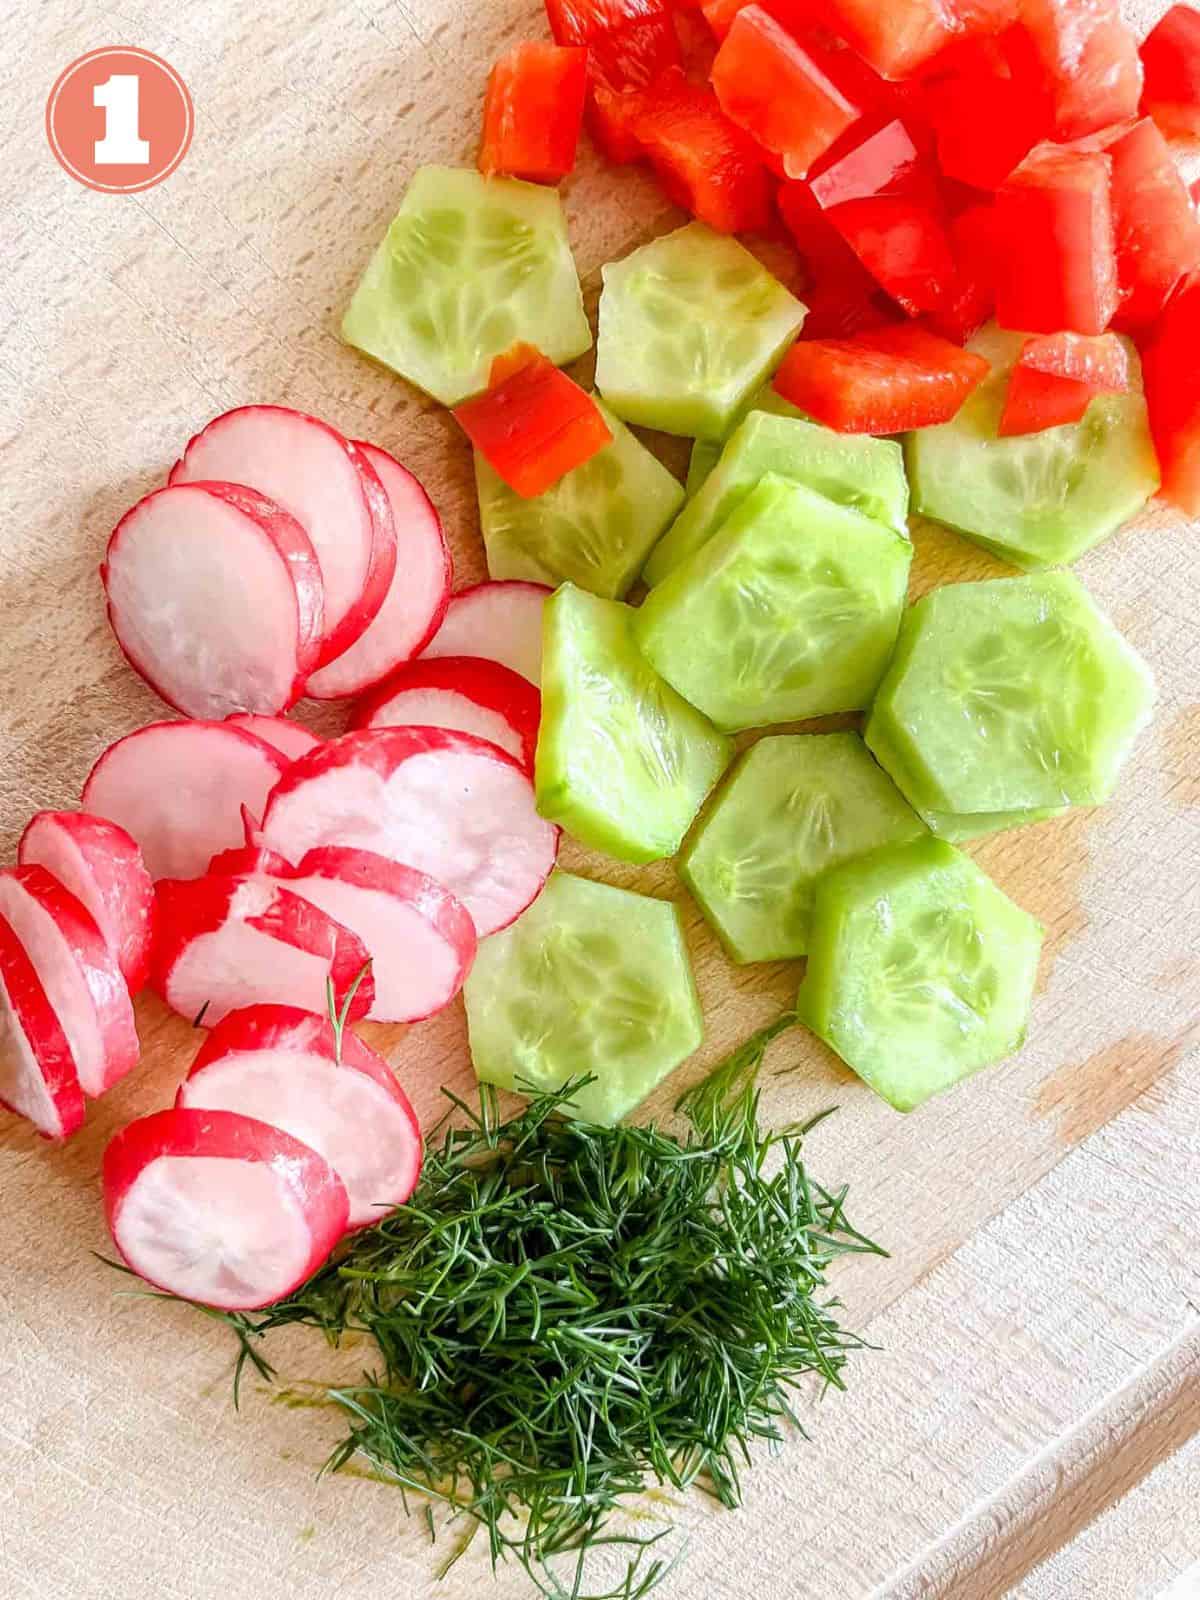 diced radish, dill, cucumber and red bell pepper on a wooden chopping board labelled number one.